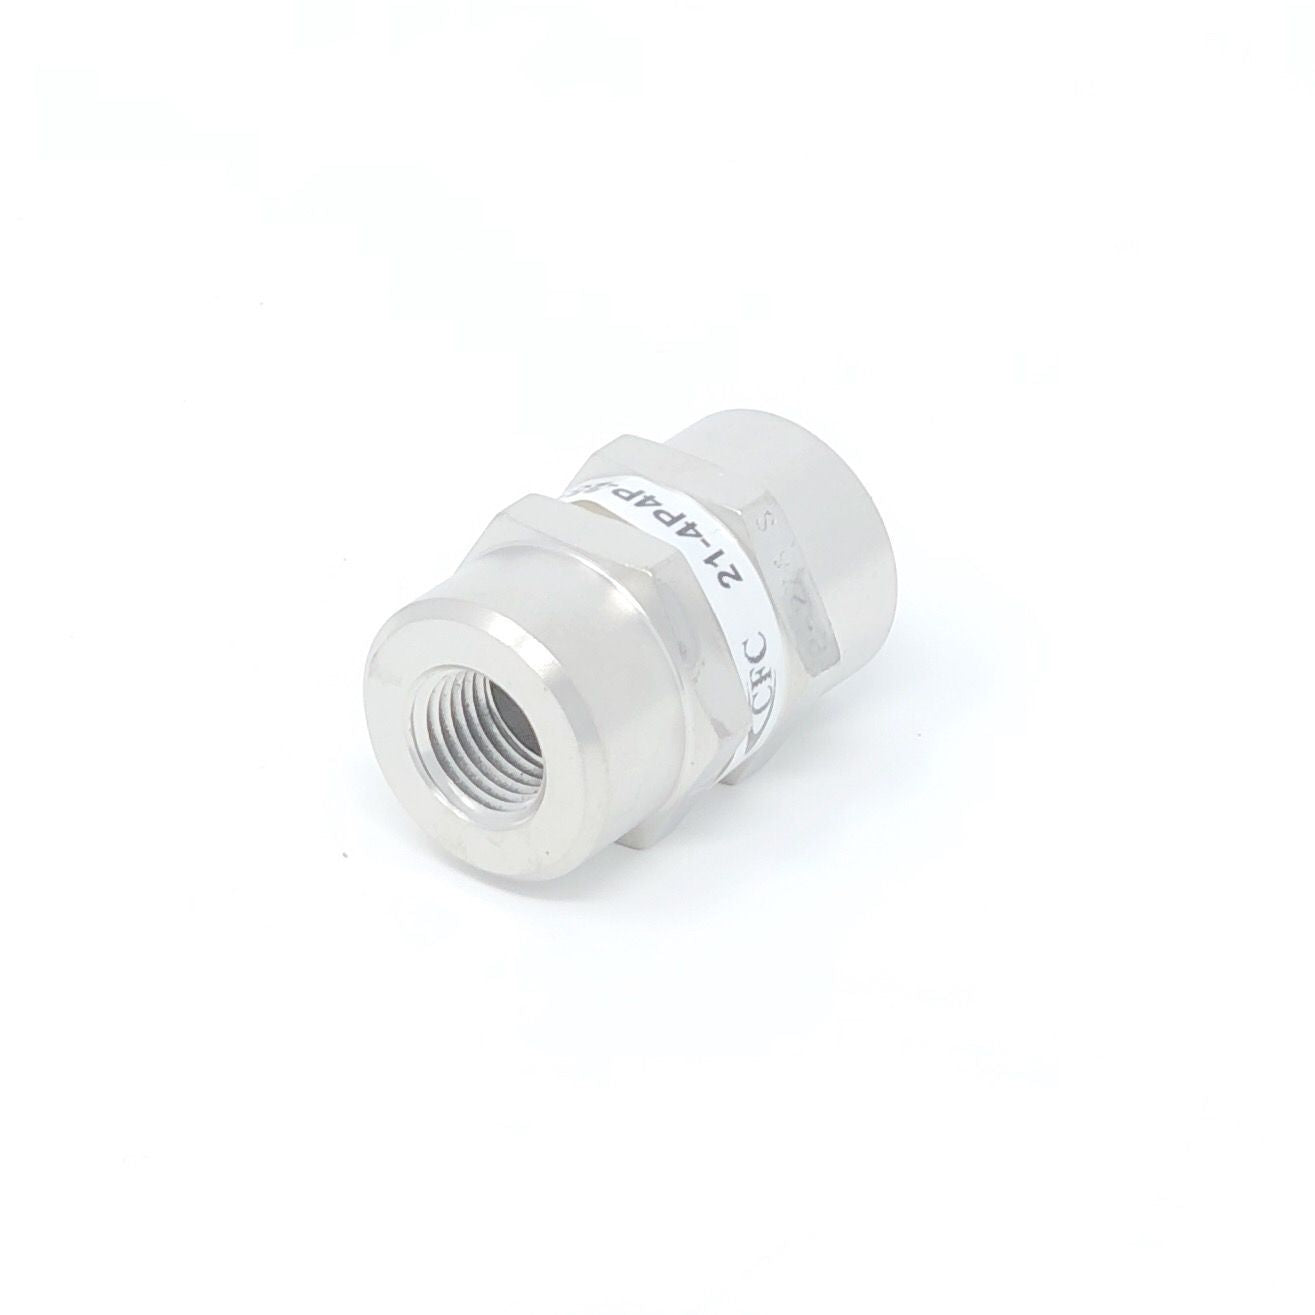 21-8S8S-100S : Chase High Pressure Inline Filter, 3000psi, #8 SAE (1/2"), 100 Micron, No Visual Indicator, With Bypass